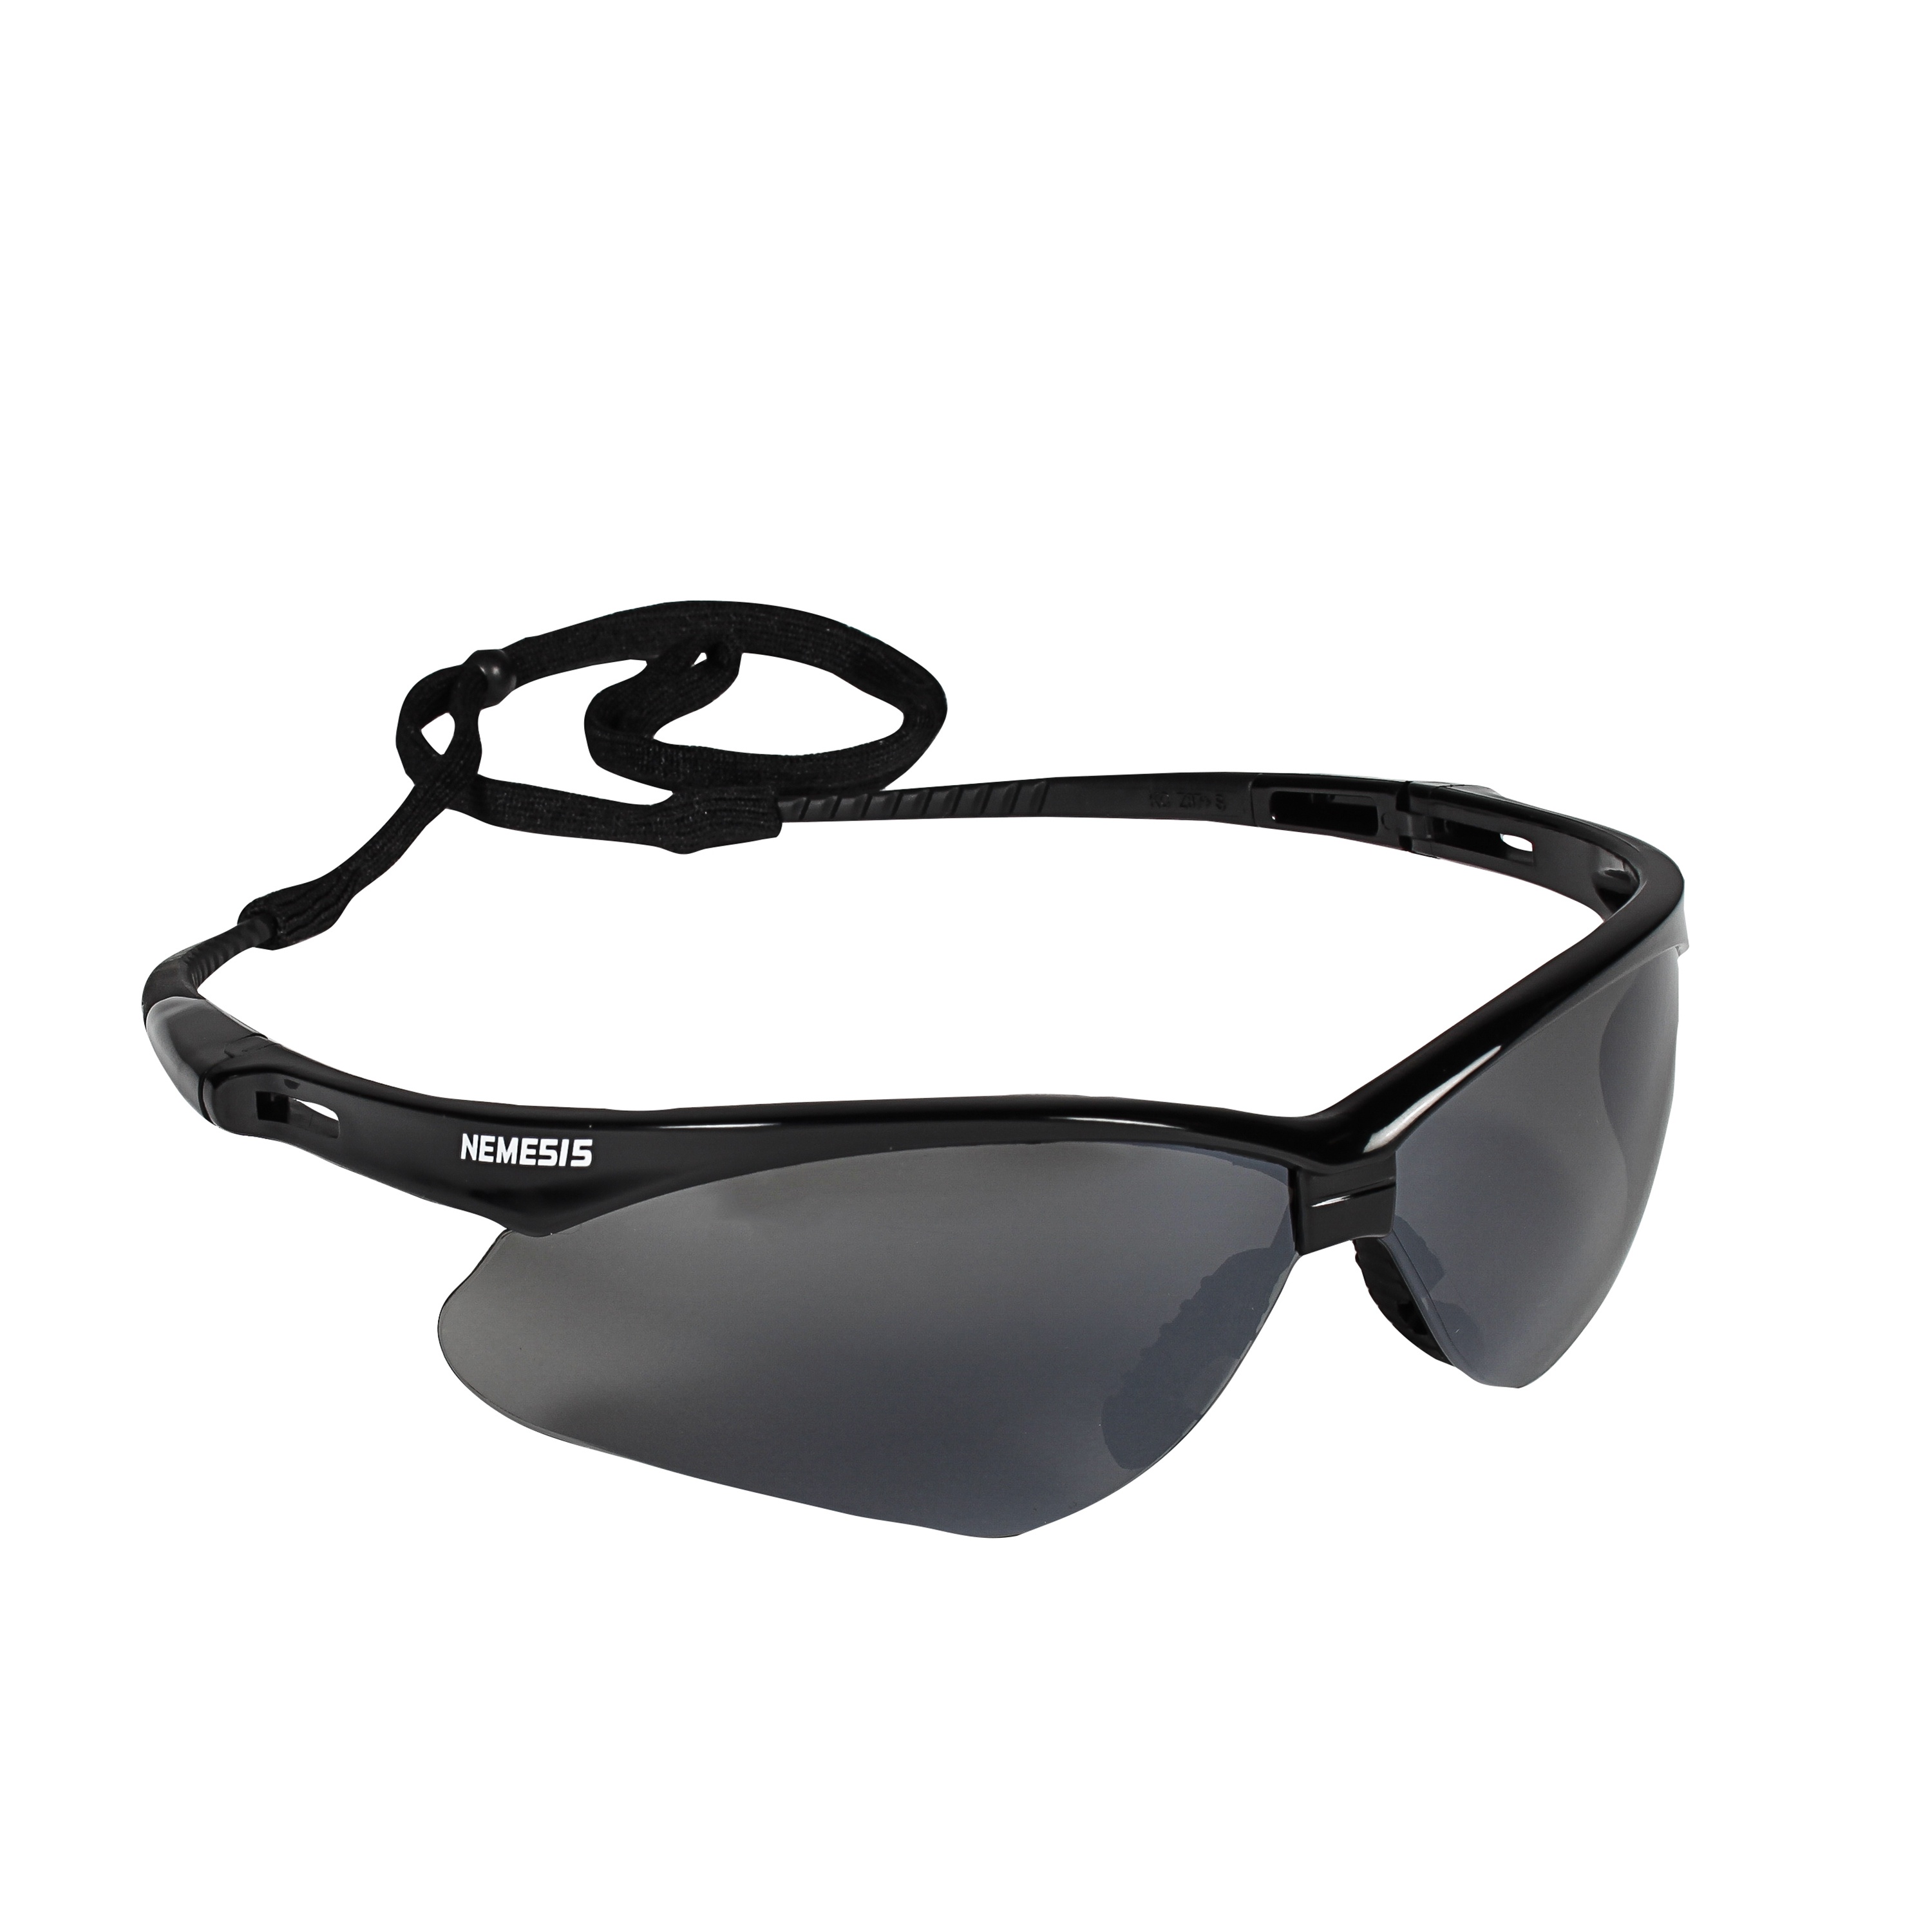 Nemesis Inferno Safety Glasses with Smoke Lens and Black Frame from Columbia Safety